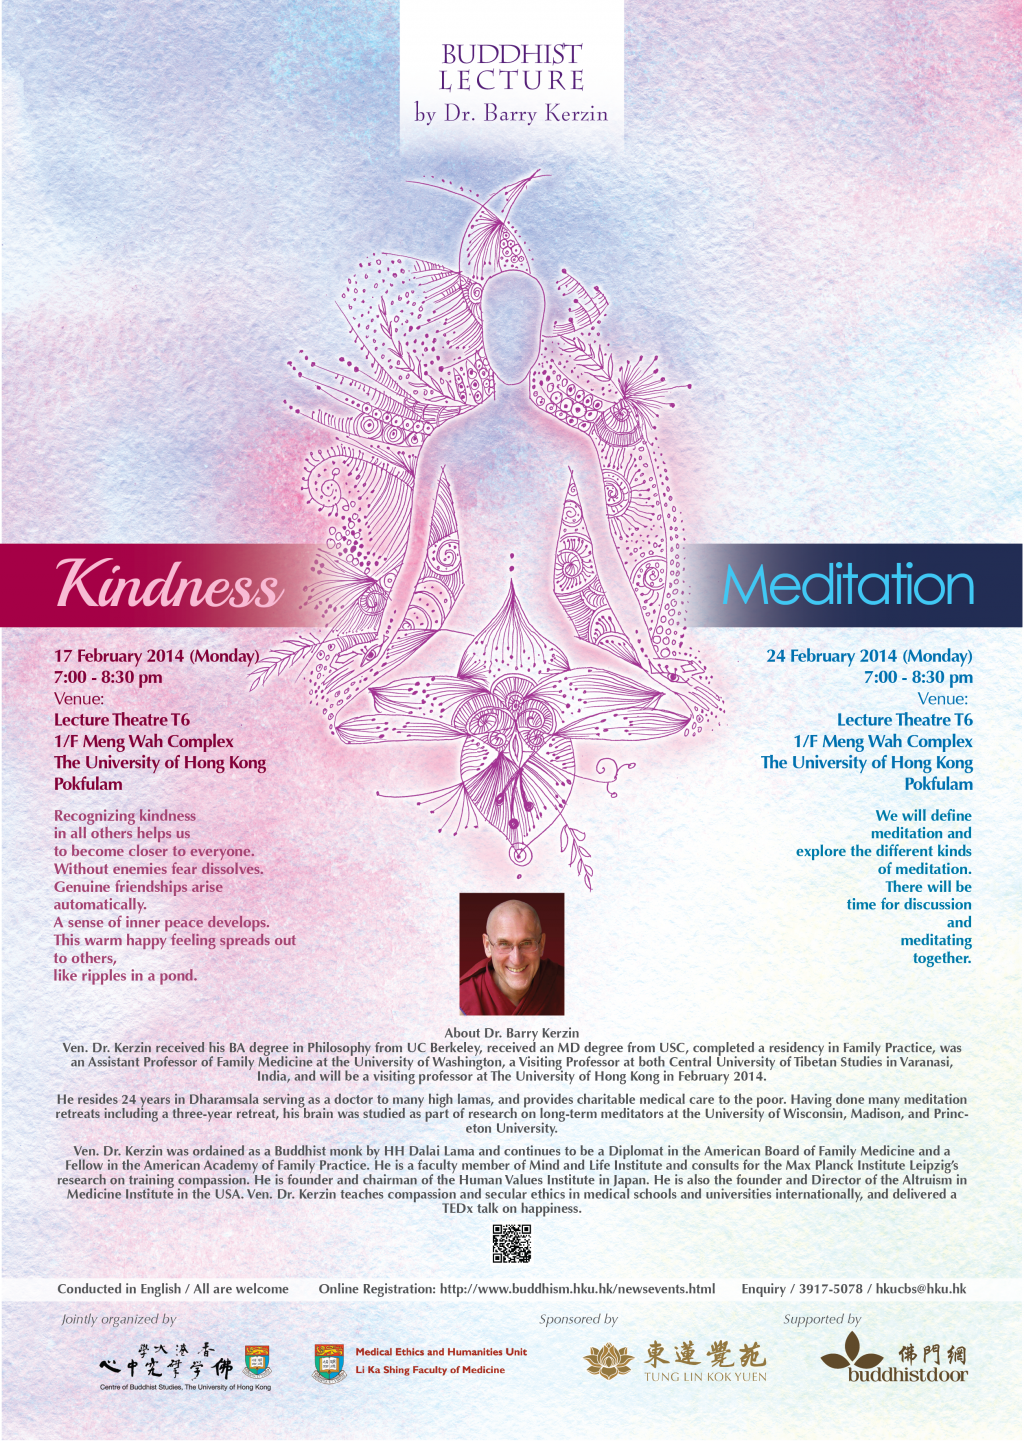 Buddhist Lecture by Dr. Barry Kerzin